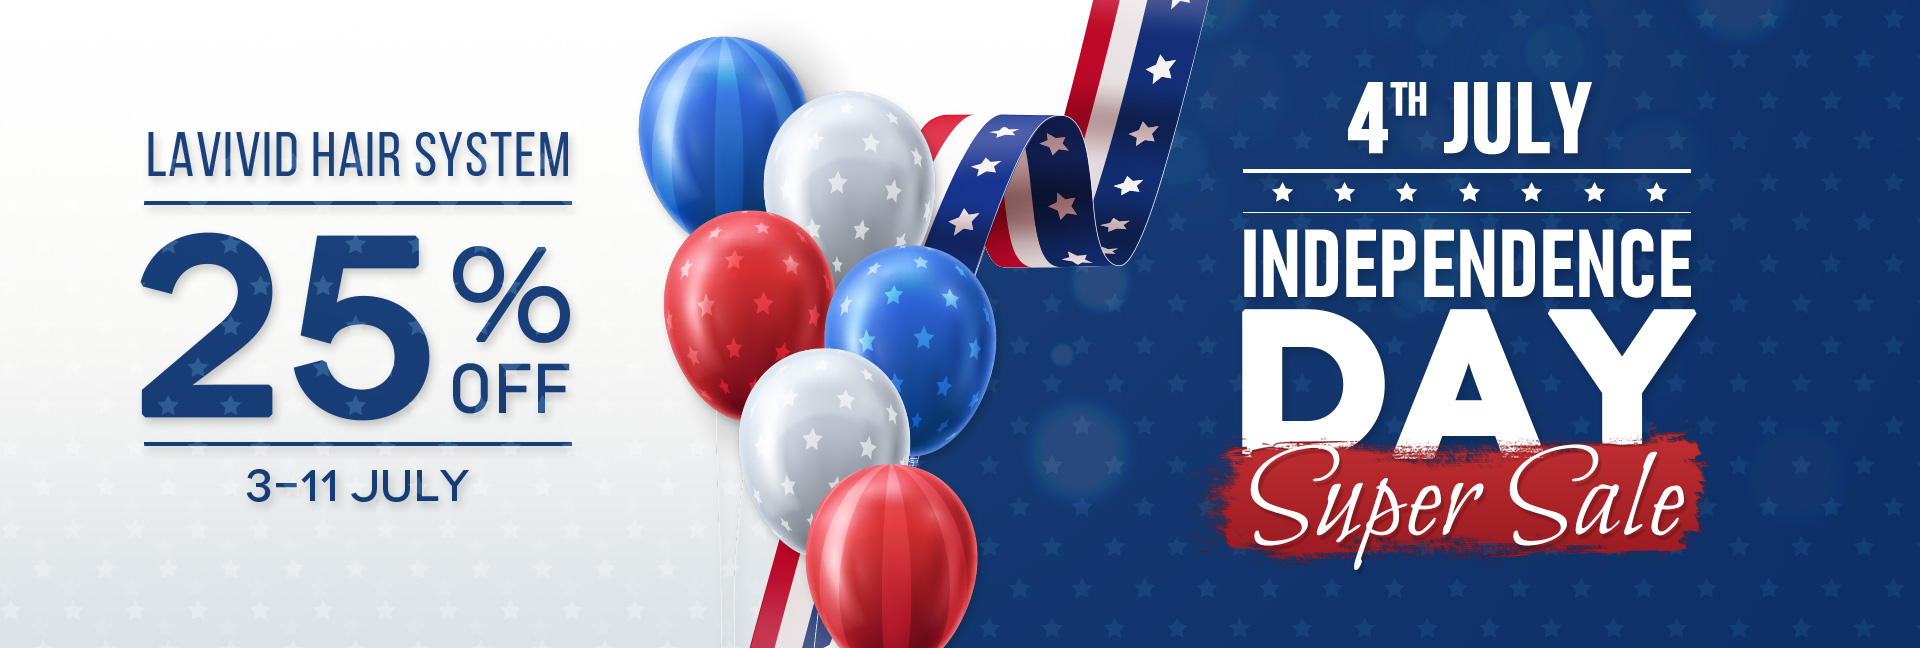 4th July Independence Day SUPER SALE 25% OFF